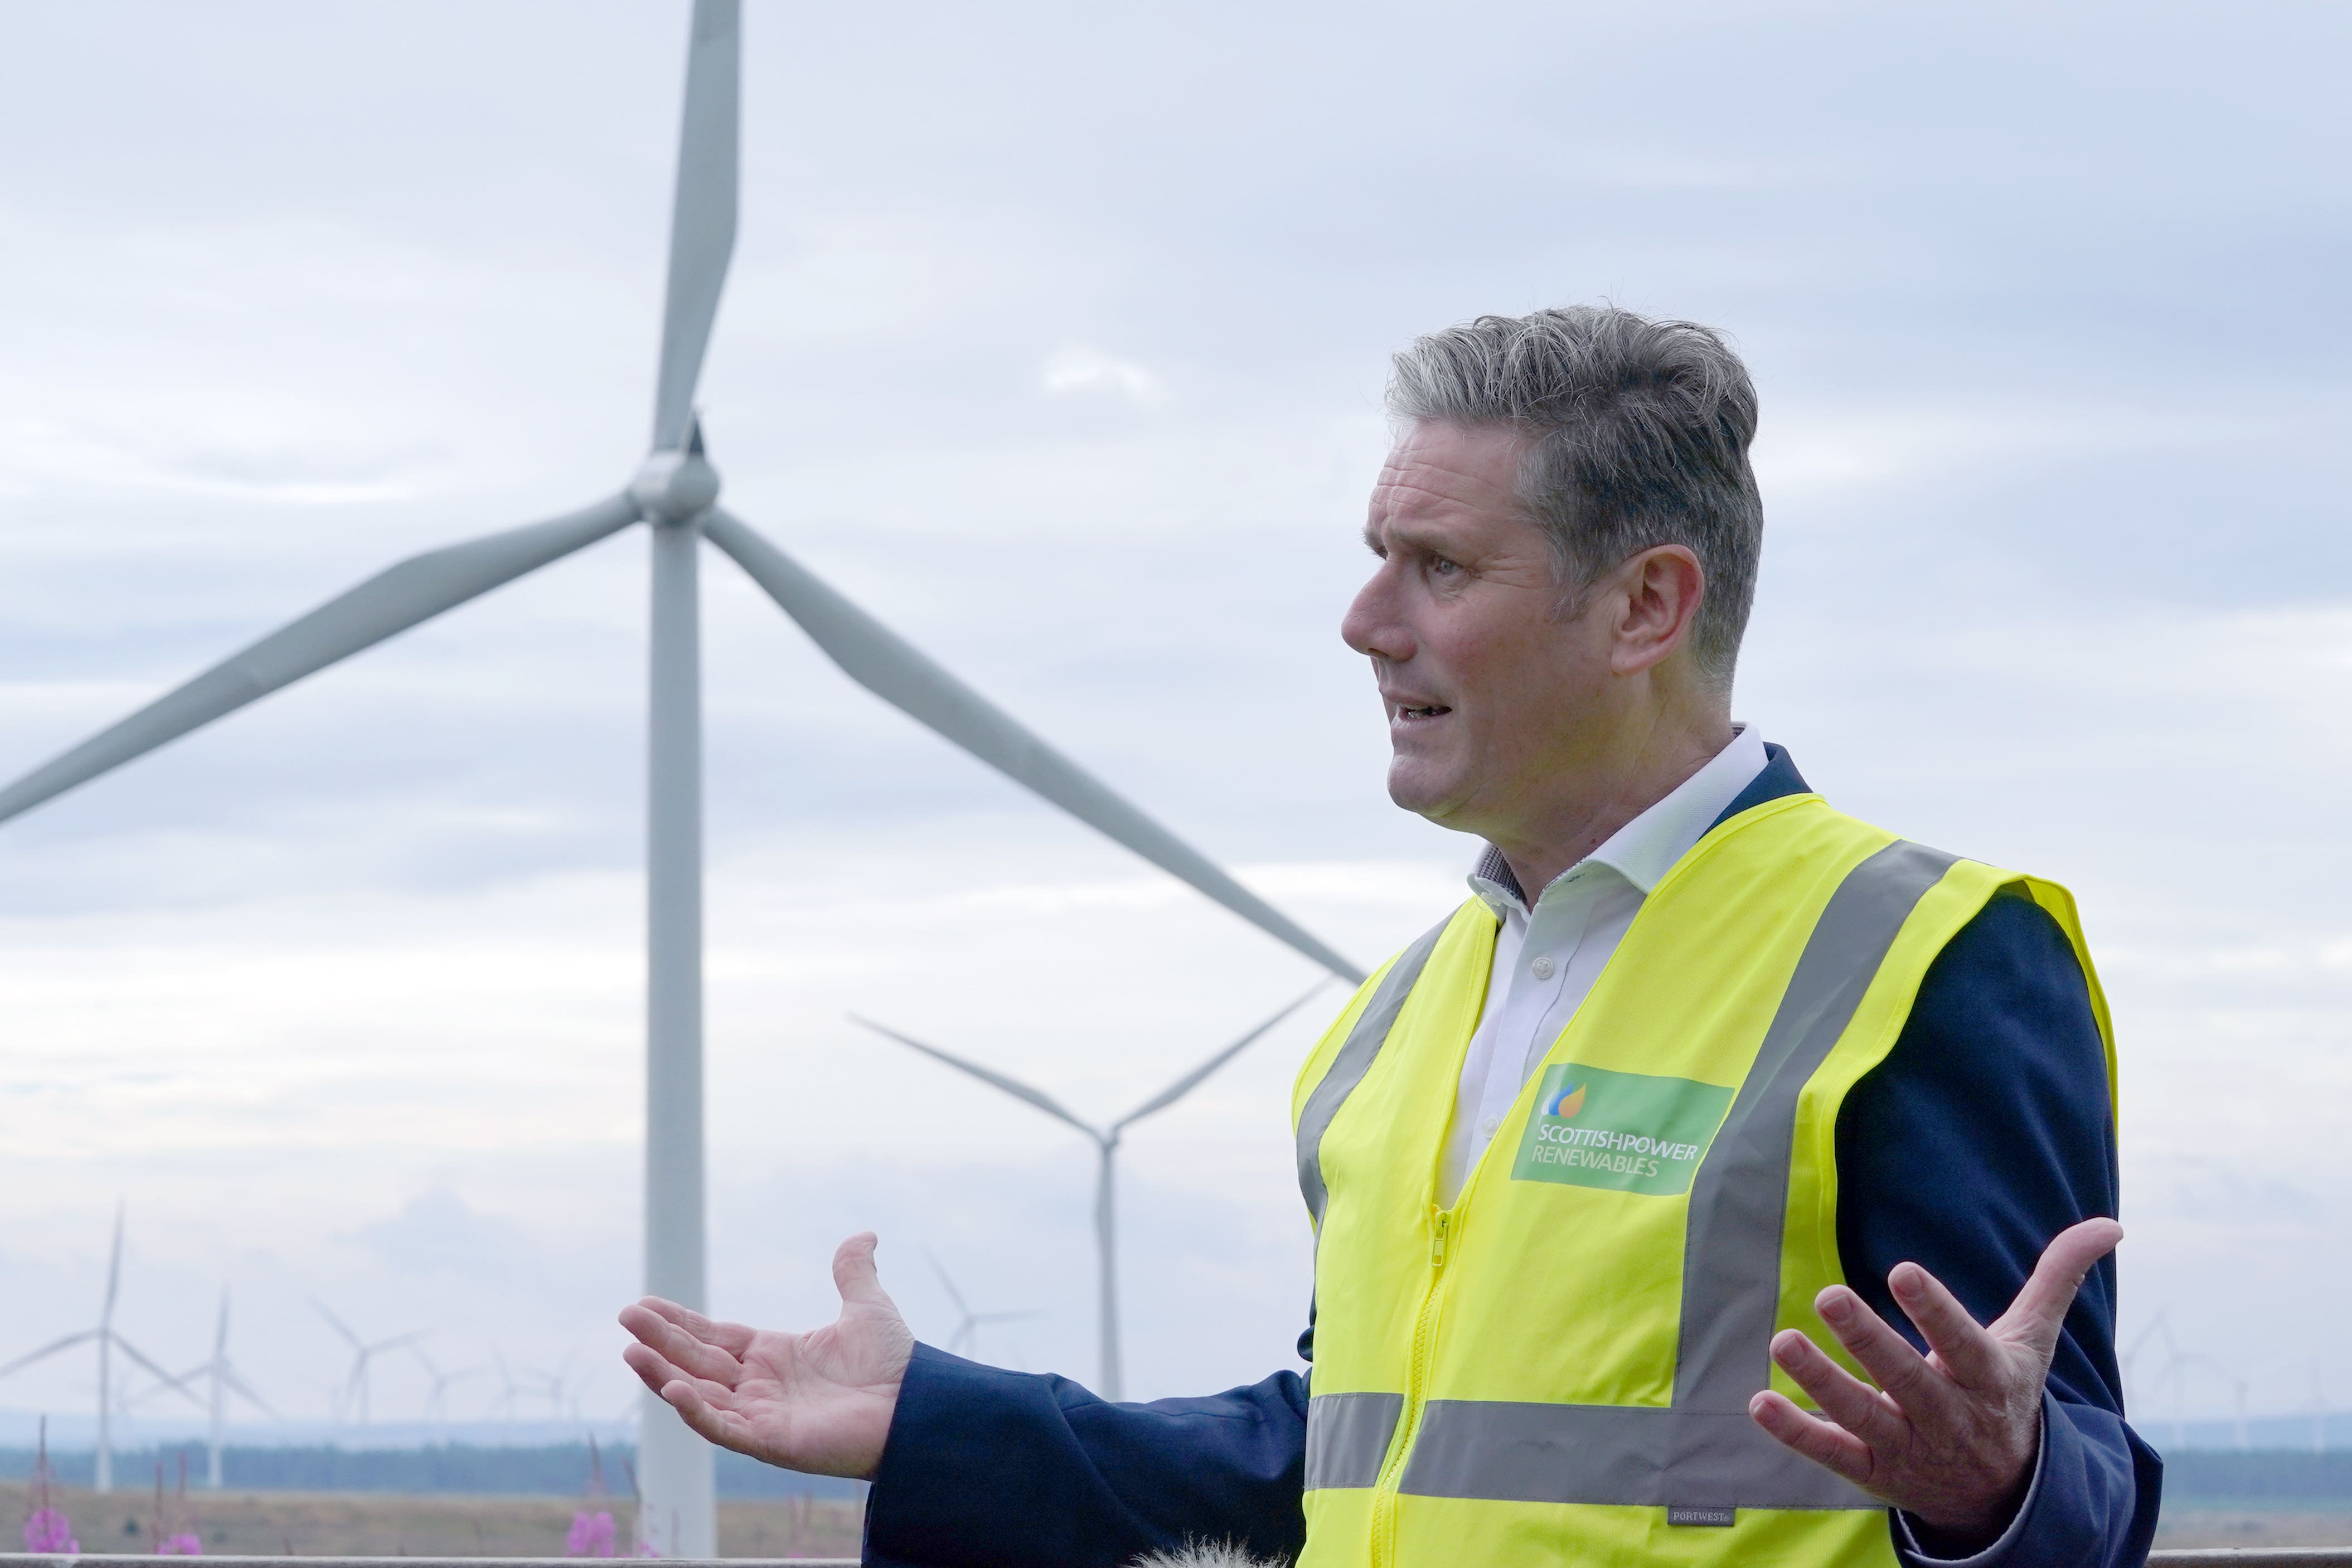 Labour leader Sir Keir Starmer during a visit to Whitelees windfarm (Andrew Milligan/PA)